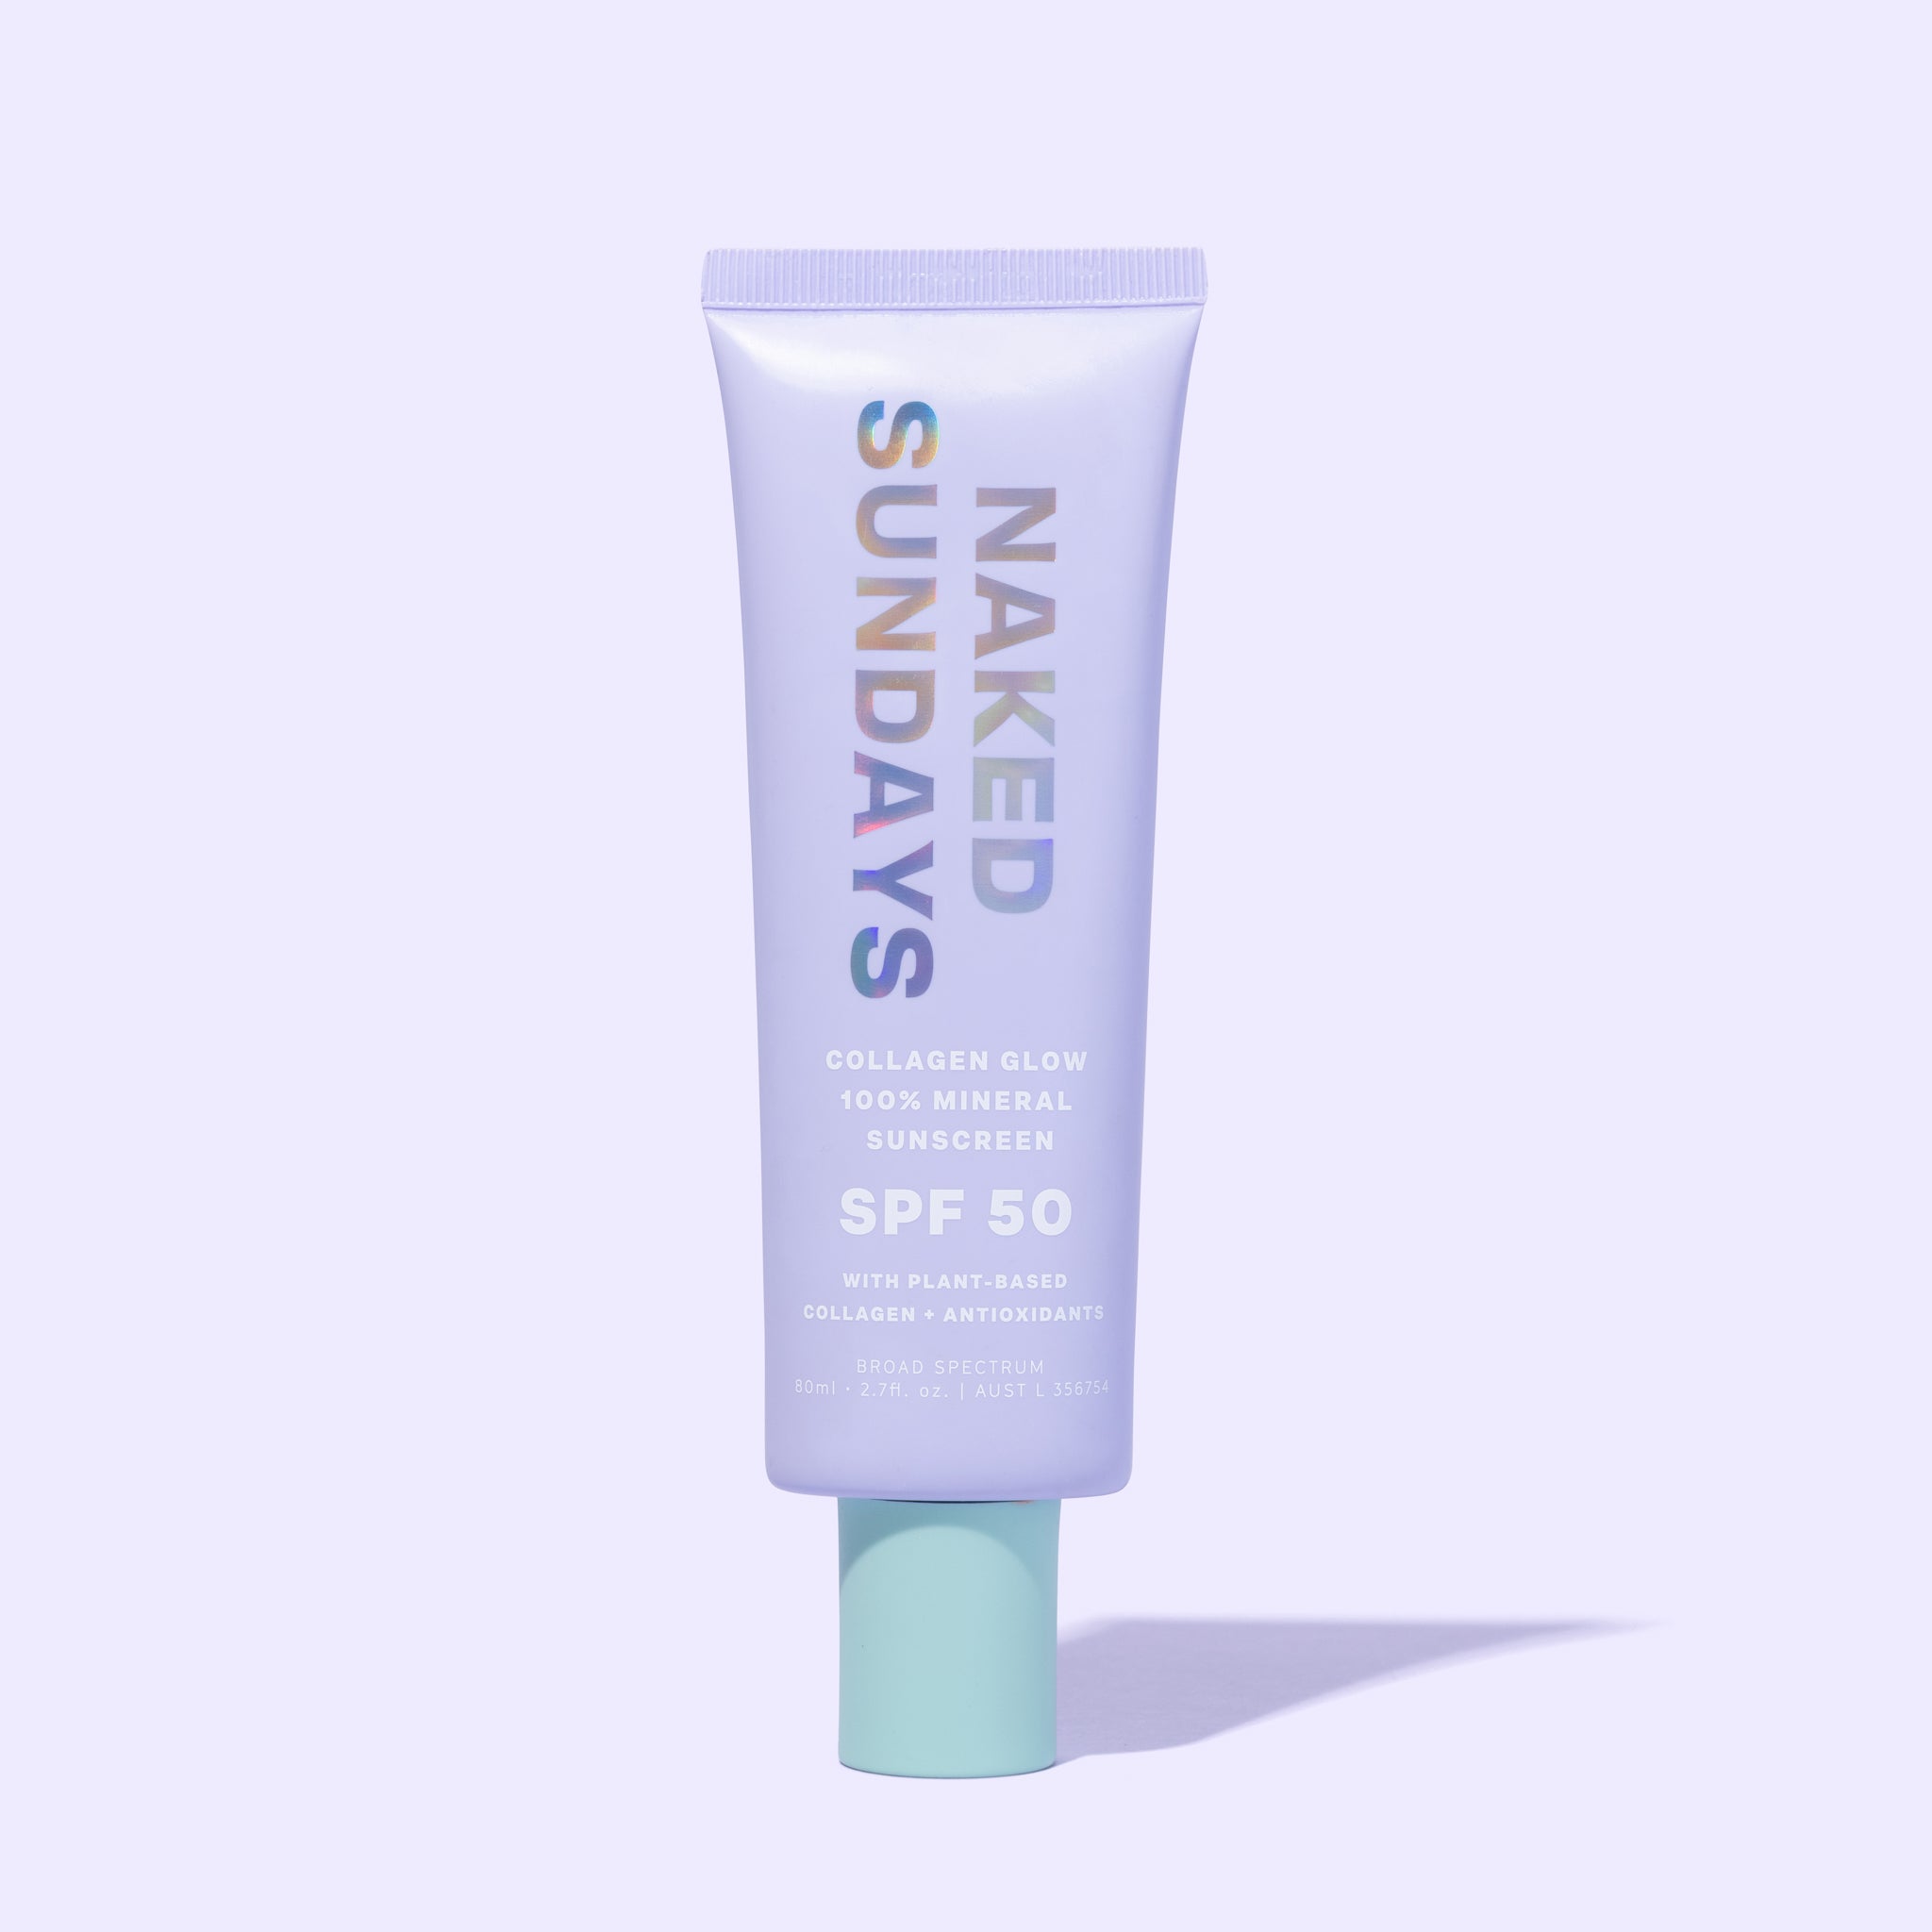 Broad Spectrum Sunscreen Primer to protect against sun damage